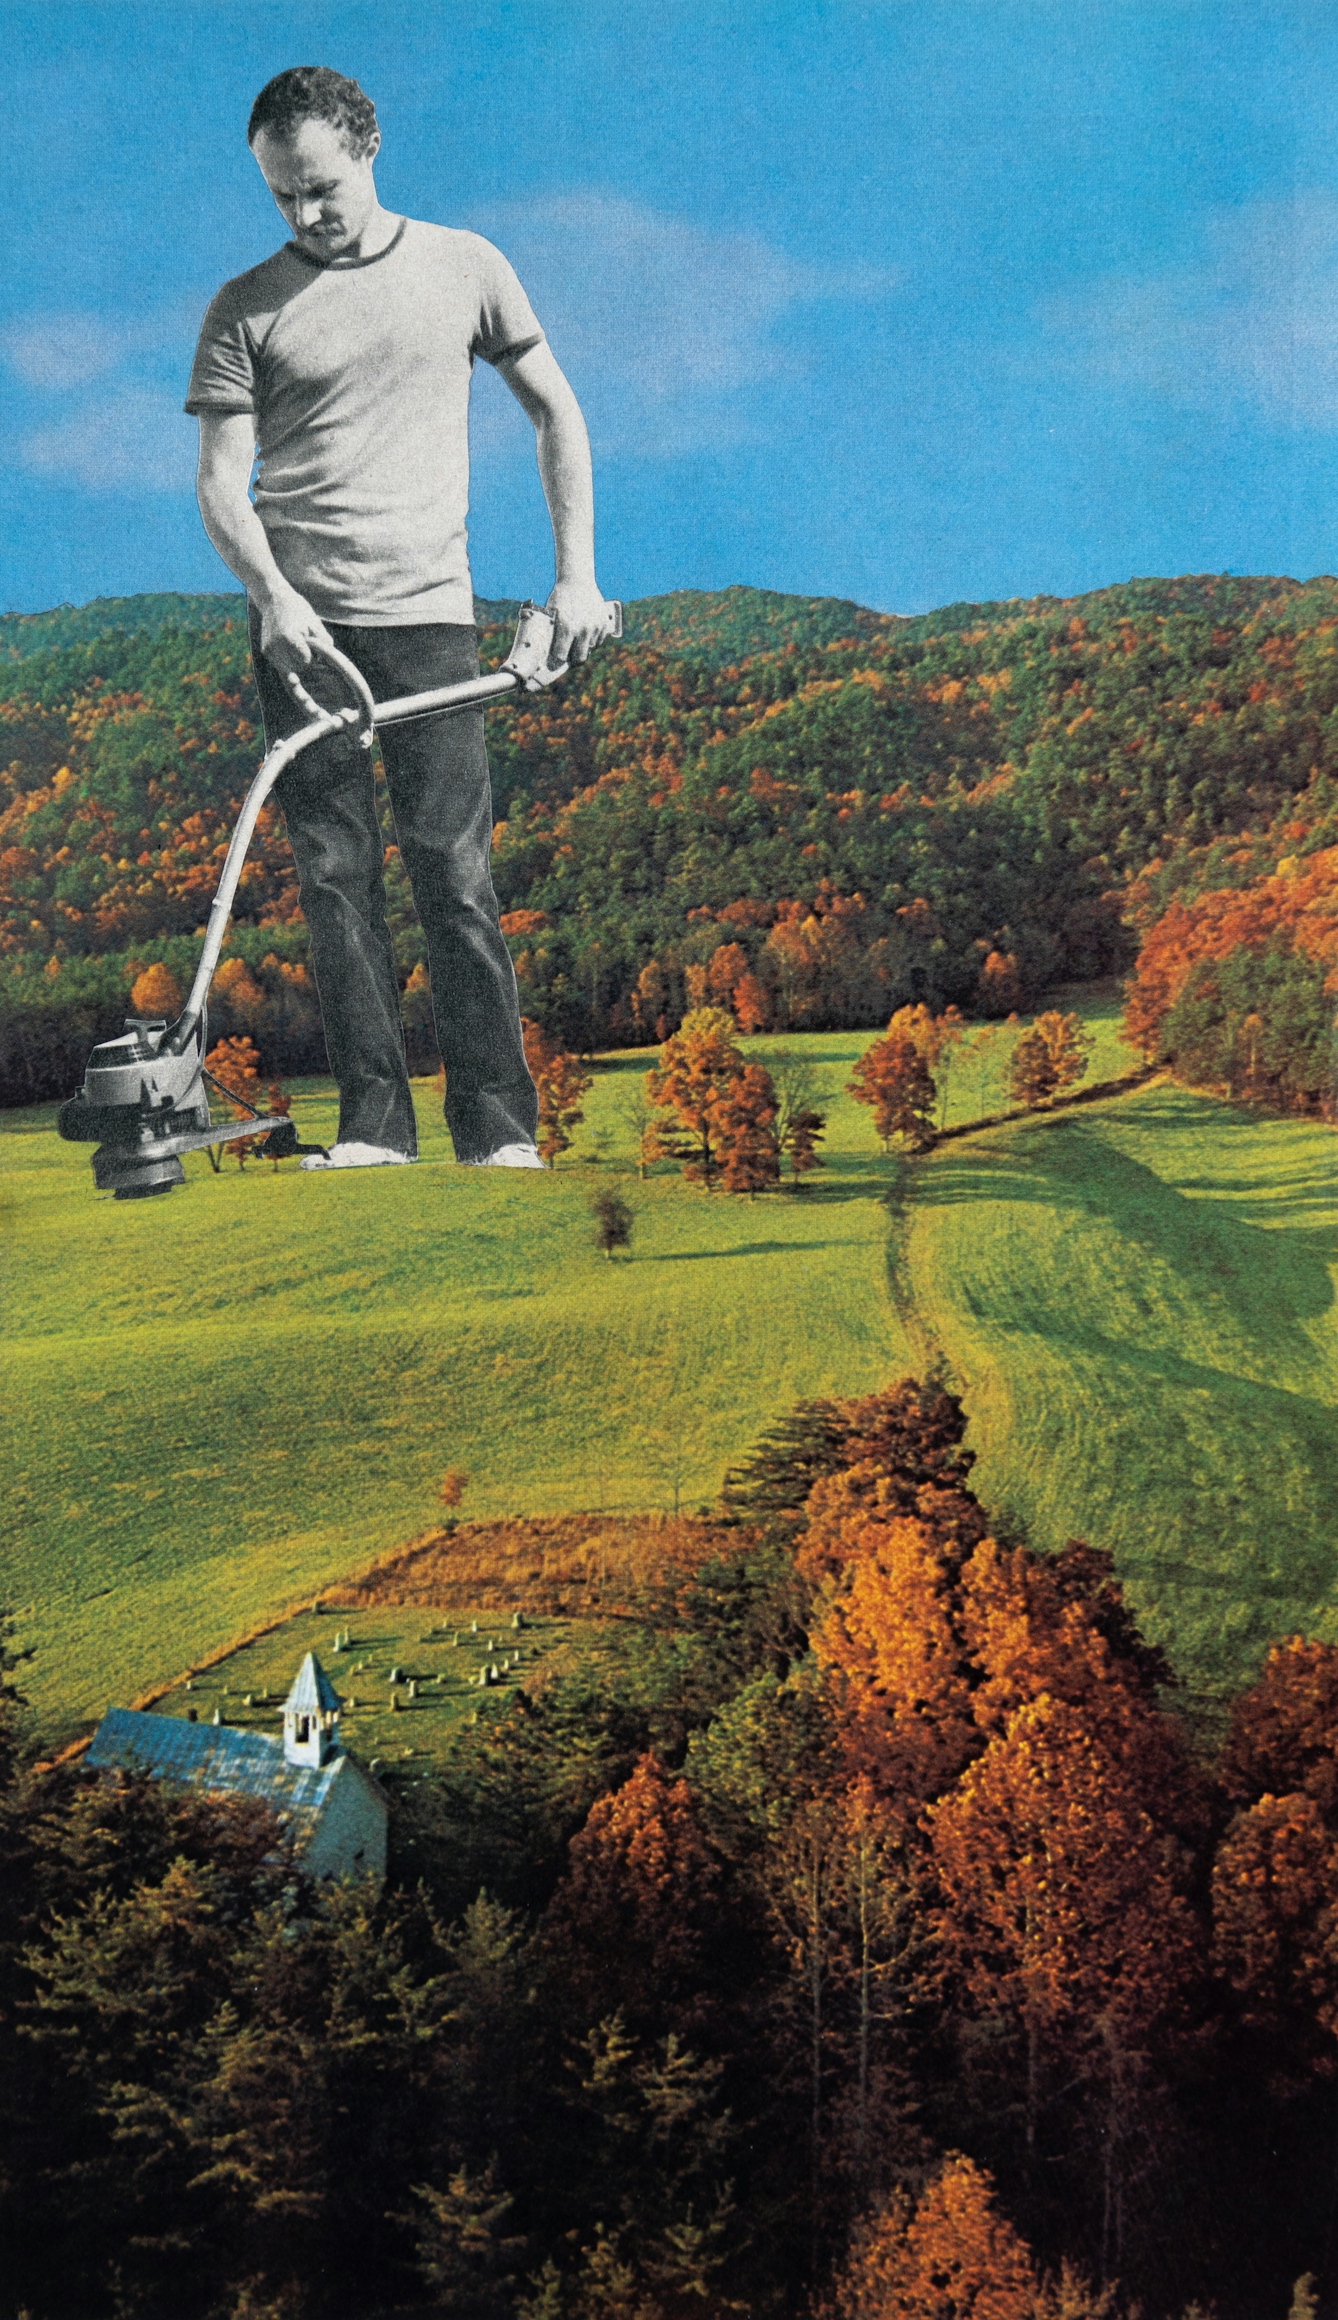 Paper collage artwork of a large black and white image of a man using a grass trimmer against a colour image of a forested landscape which has been partially cleared. A church and graveyard can be found in the bottom left corner of the image.